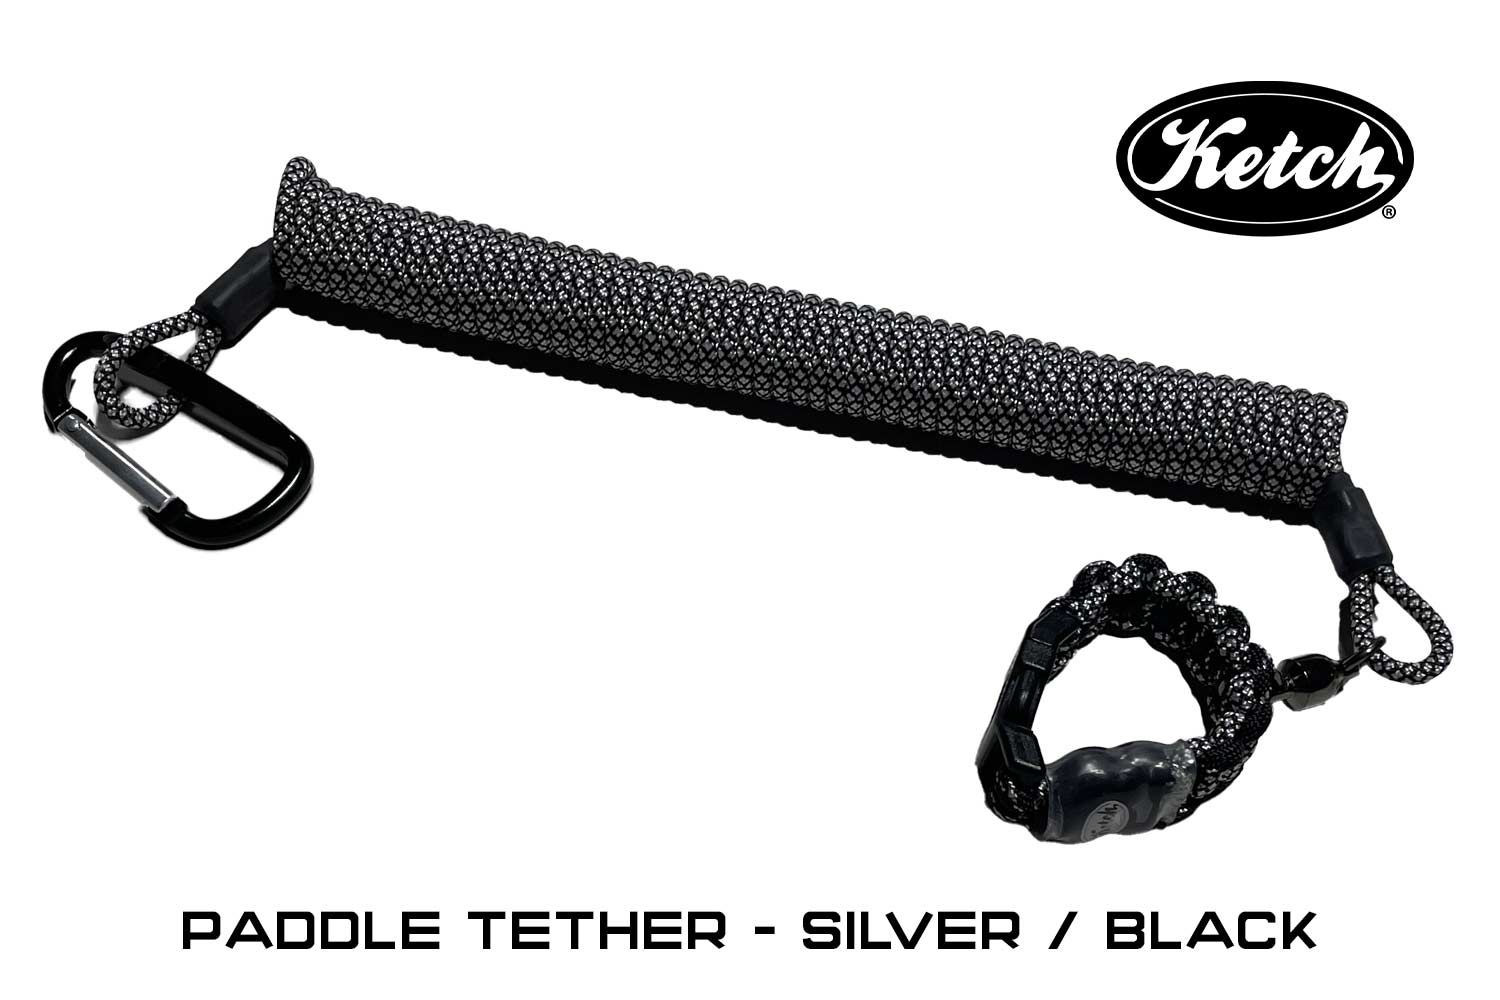 Paddle Tether – Ketch Products